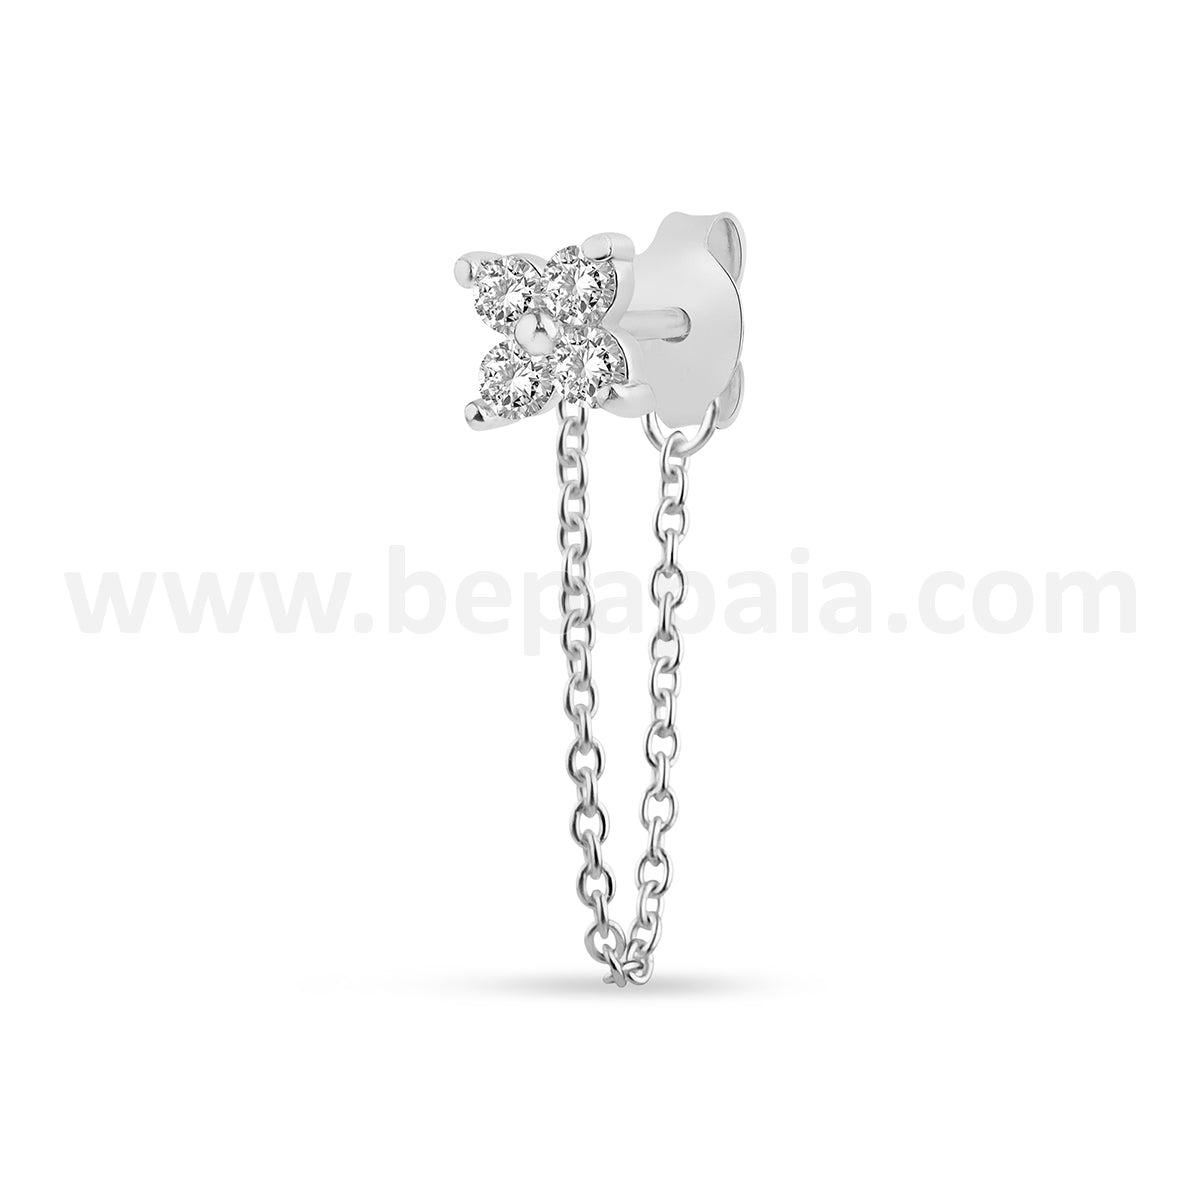 Silver ear stud with mix zirconias and chain